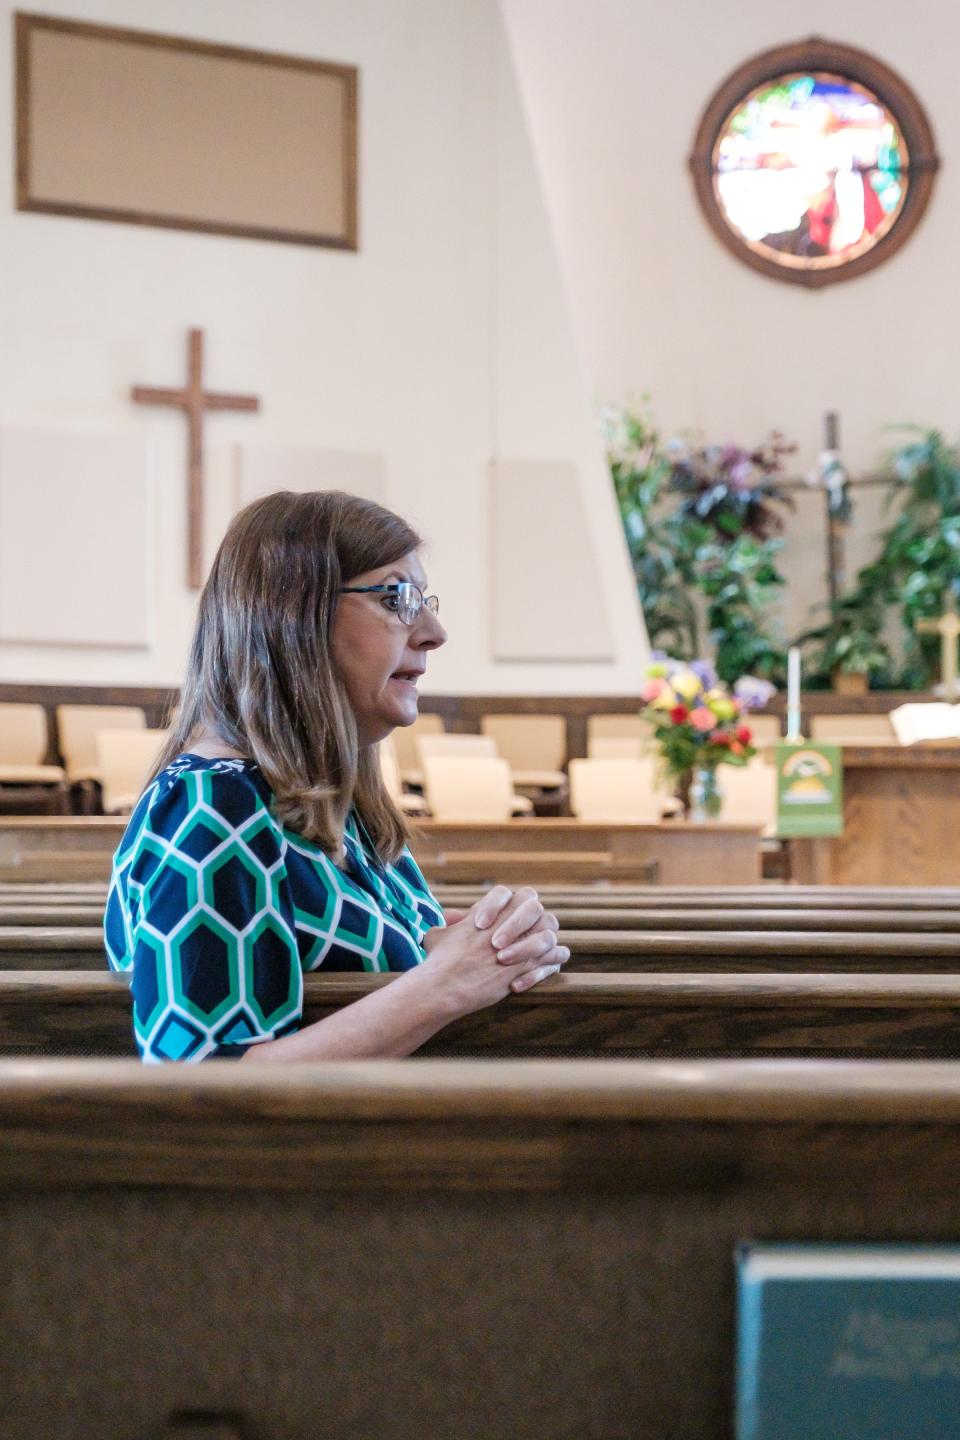 Pastor Shelly Nordine of Dover Faith Global Methodist Church reflects upon disaffiliation from the United Methodist Church while sitting in a pew at the Broadway Global Methodist Church in New Philadelphia.